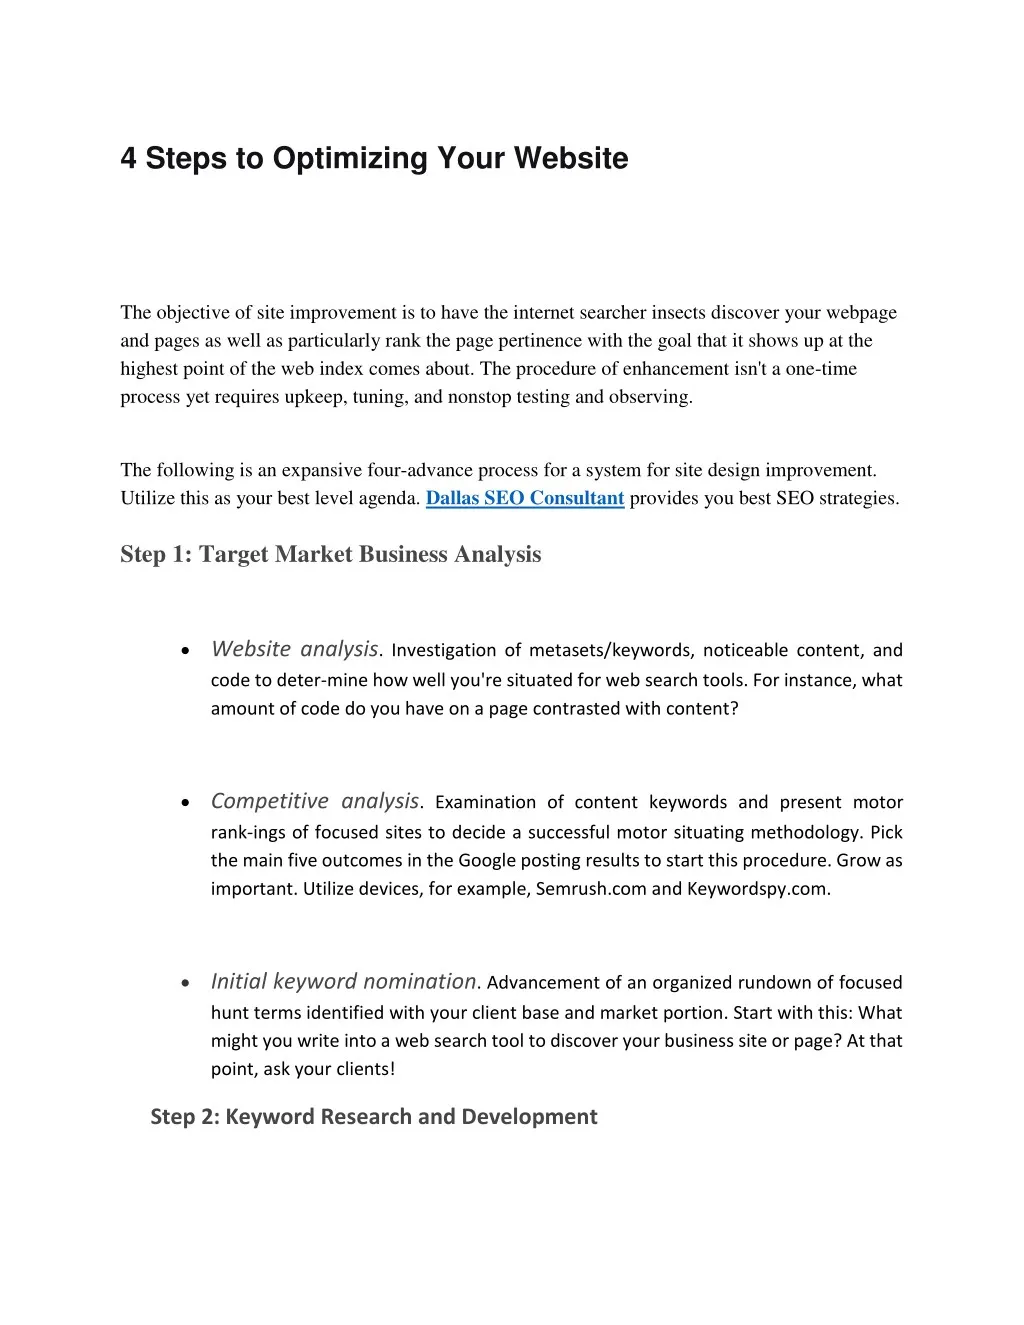 4 steps to optimizing your website